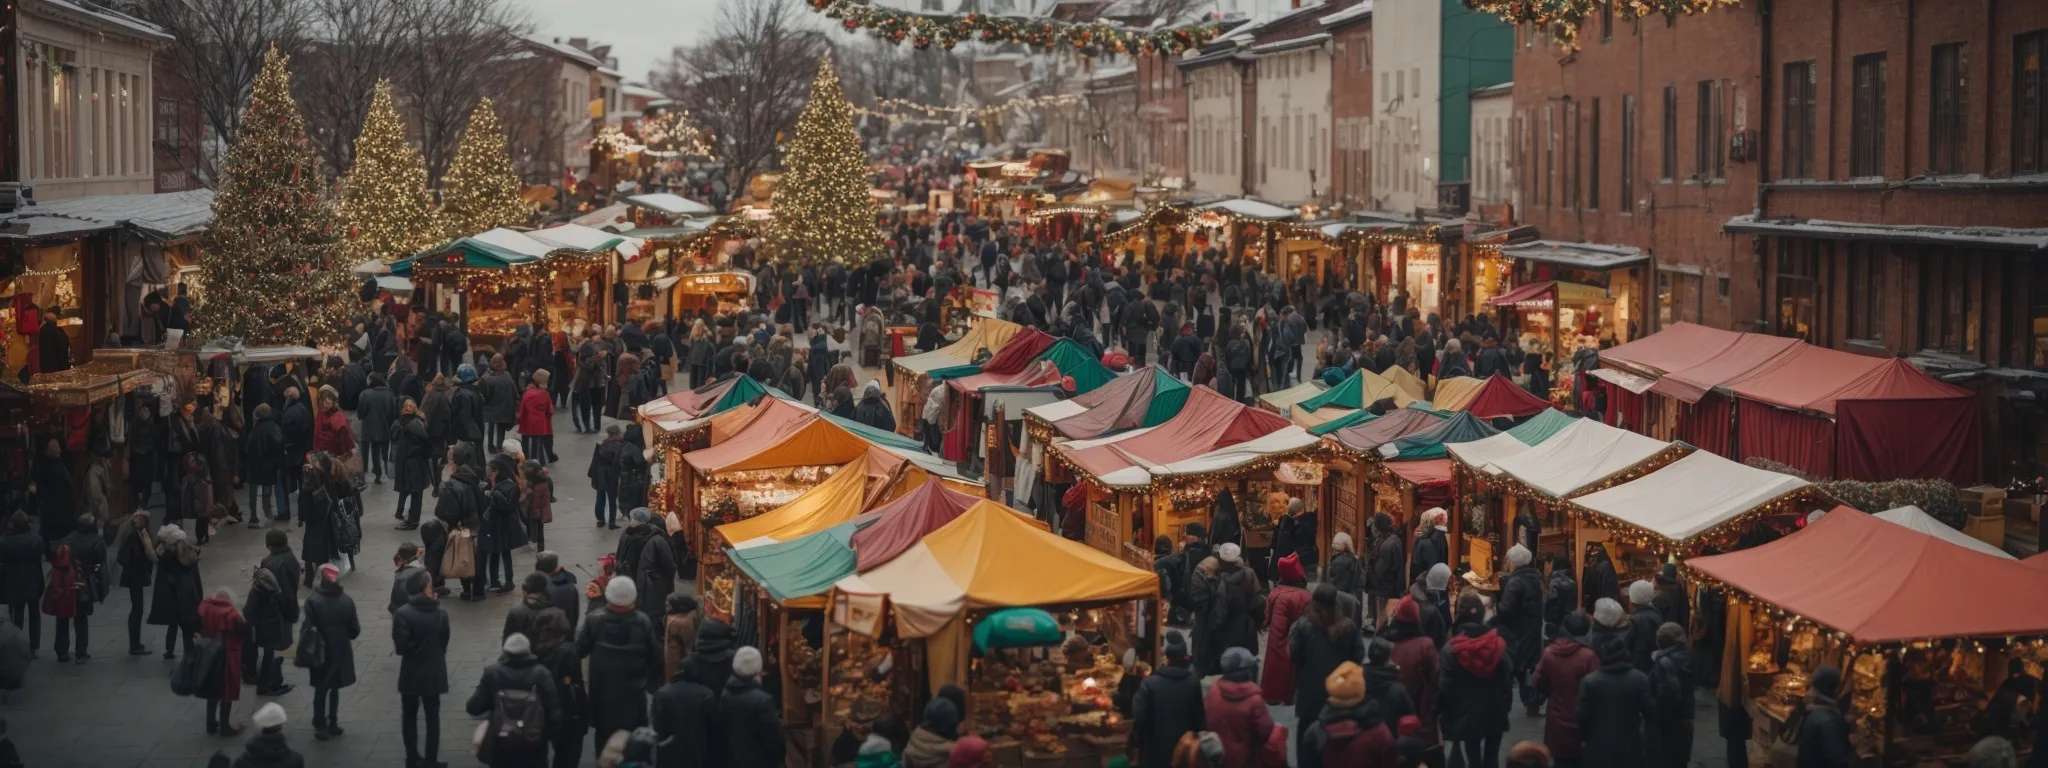 a bustling holiday market scene with colorful stalls and festive decorations designed to attract shoppers.